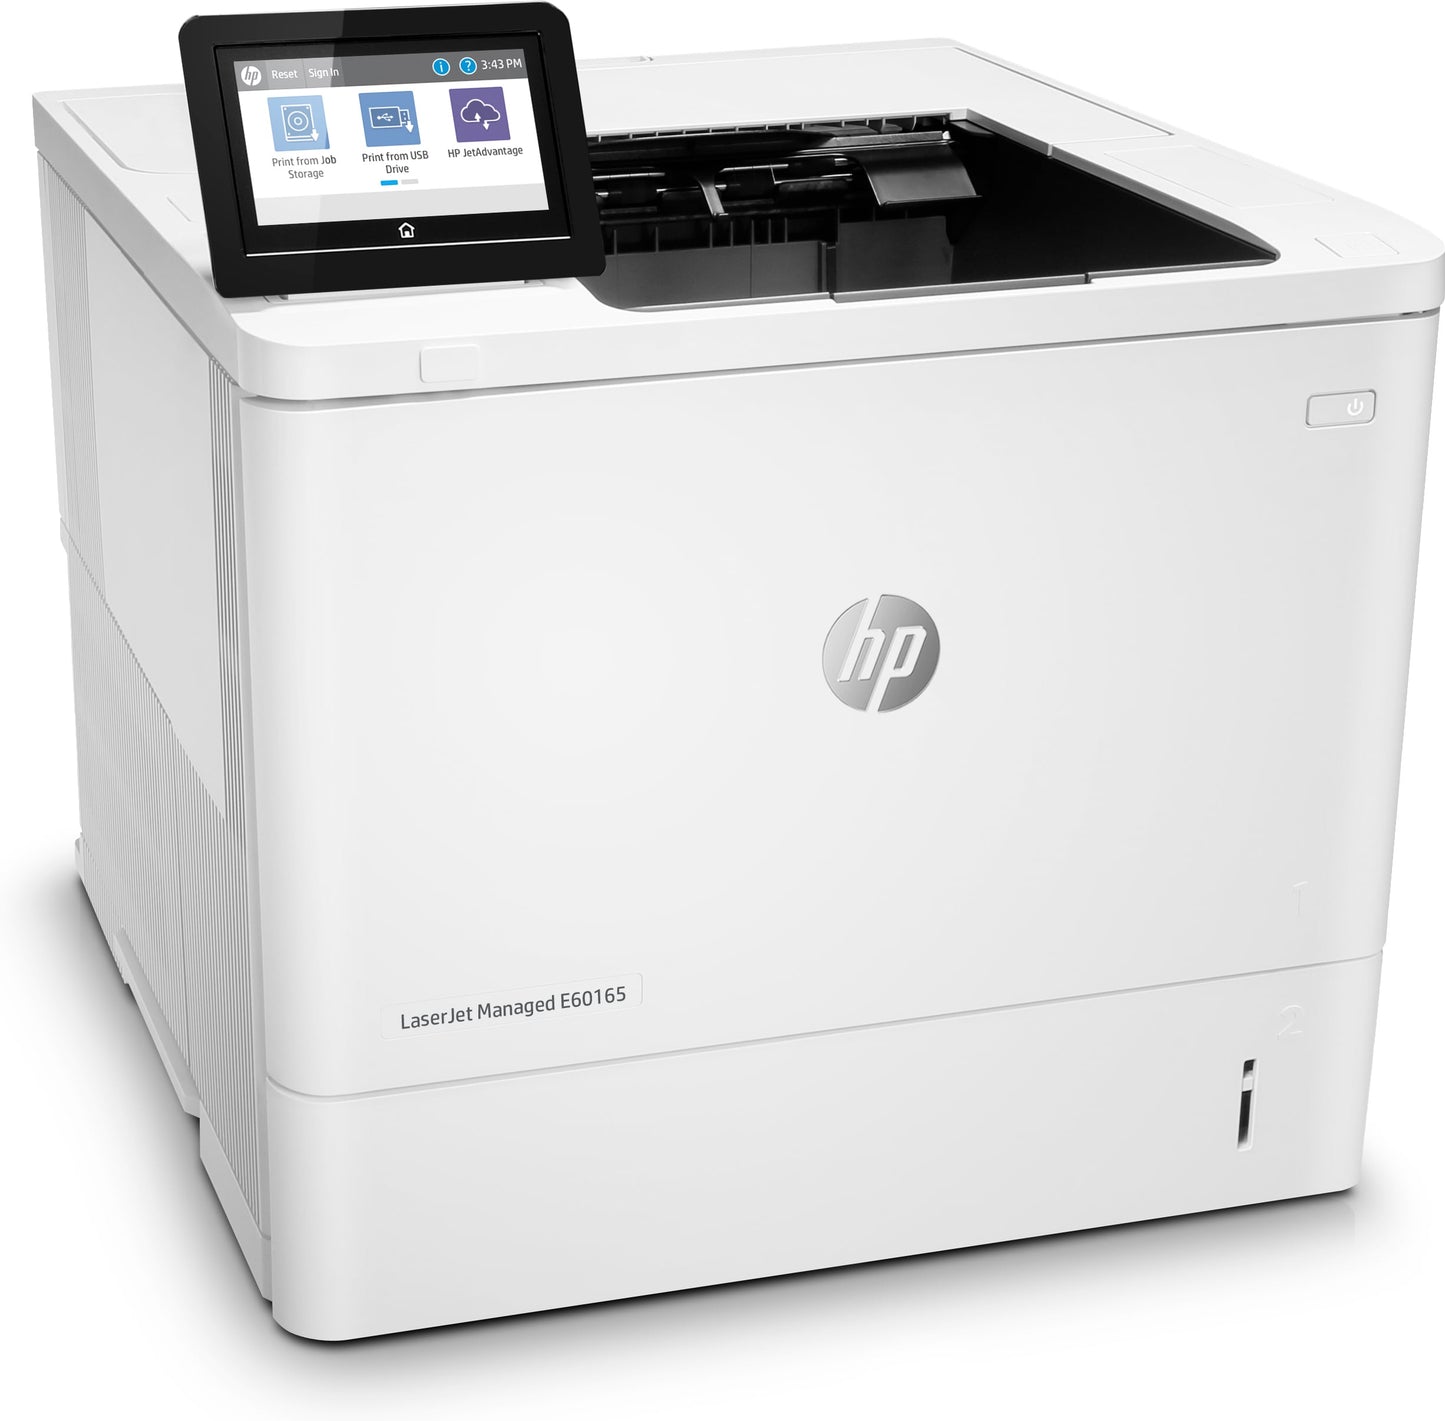 HP LaserJet Managed E60165dn Black and white Printer for Business Print Front-facing USB printing; Two-sided printing